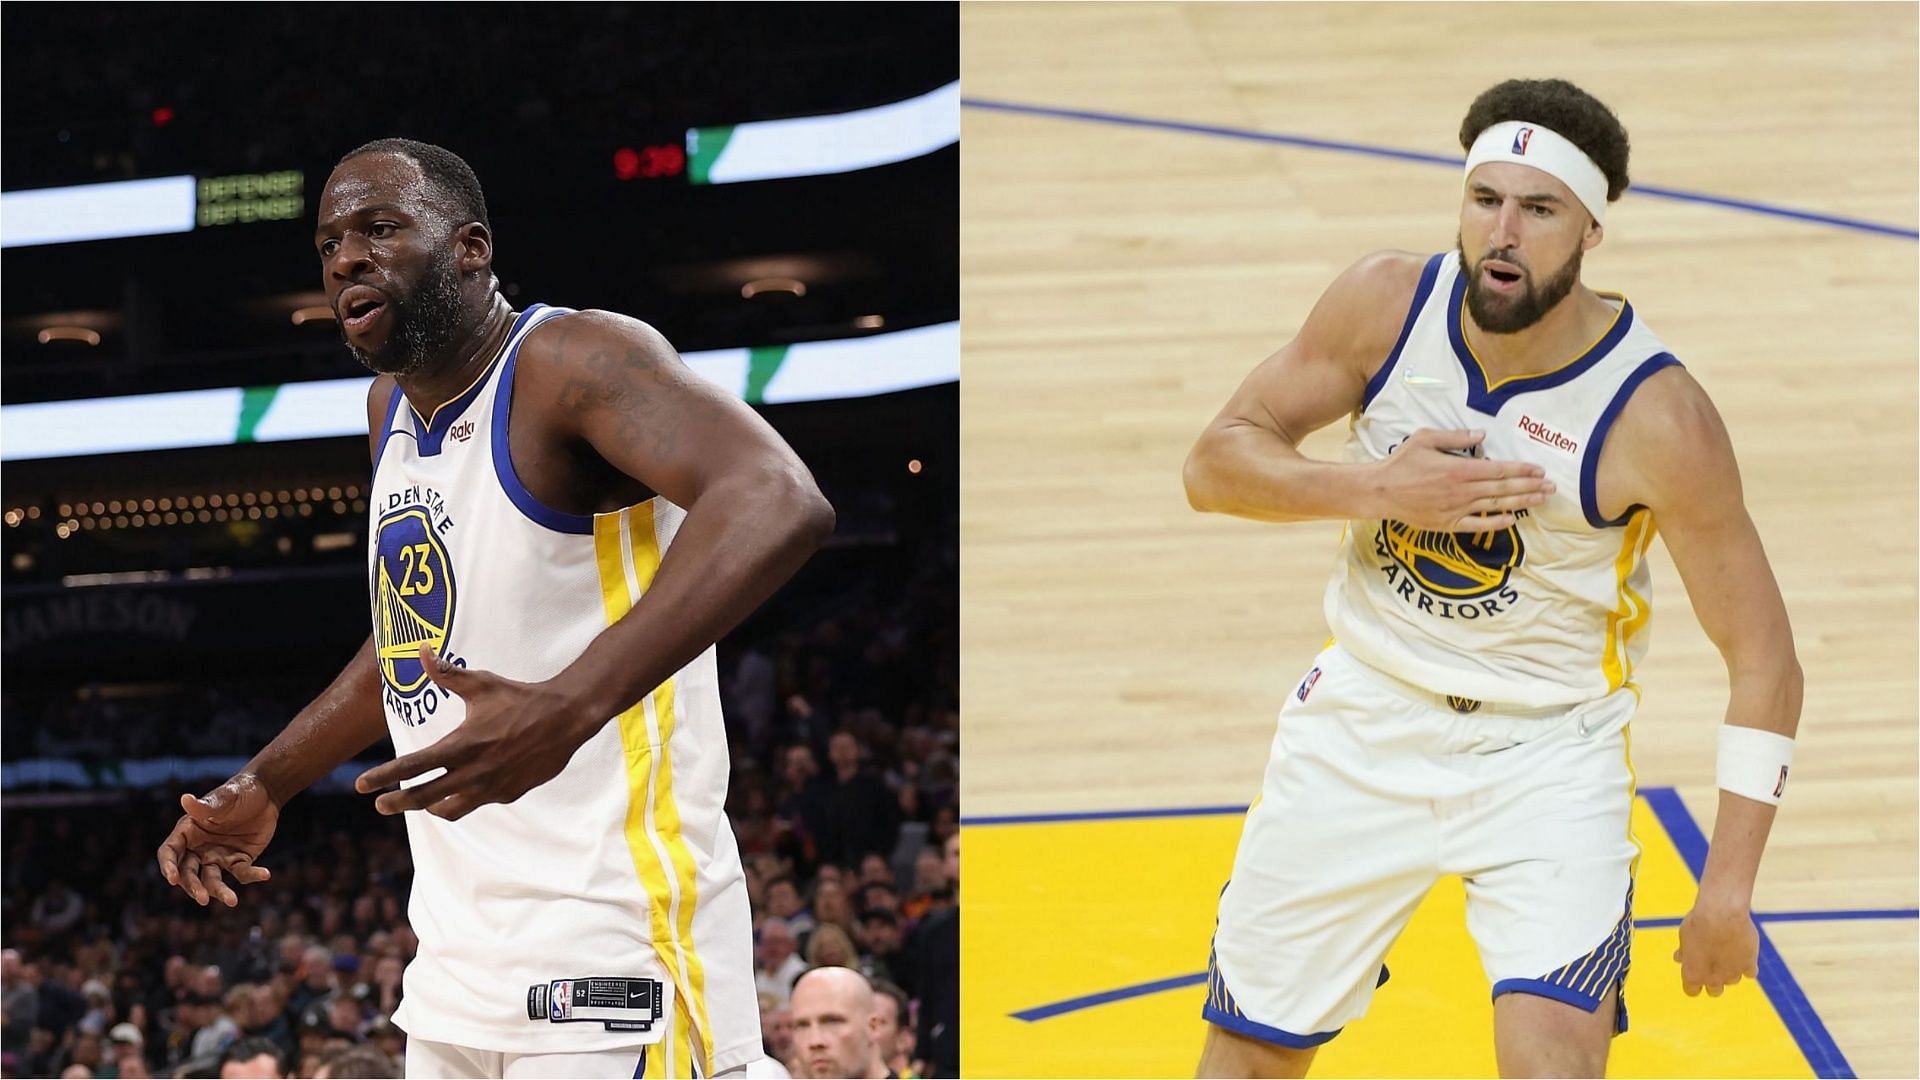 Should the Golden State Warriors trade Draymond Green and Klay Thompson?